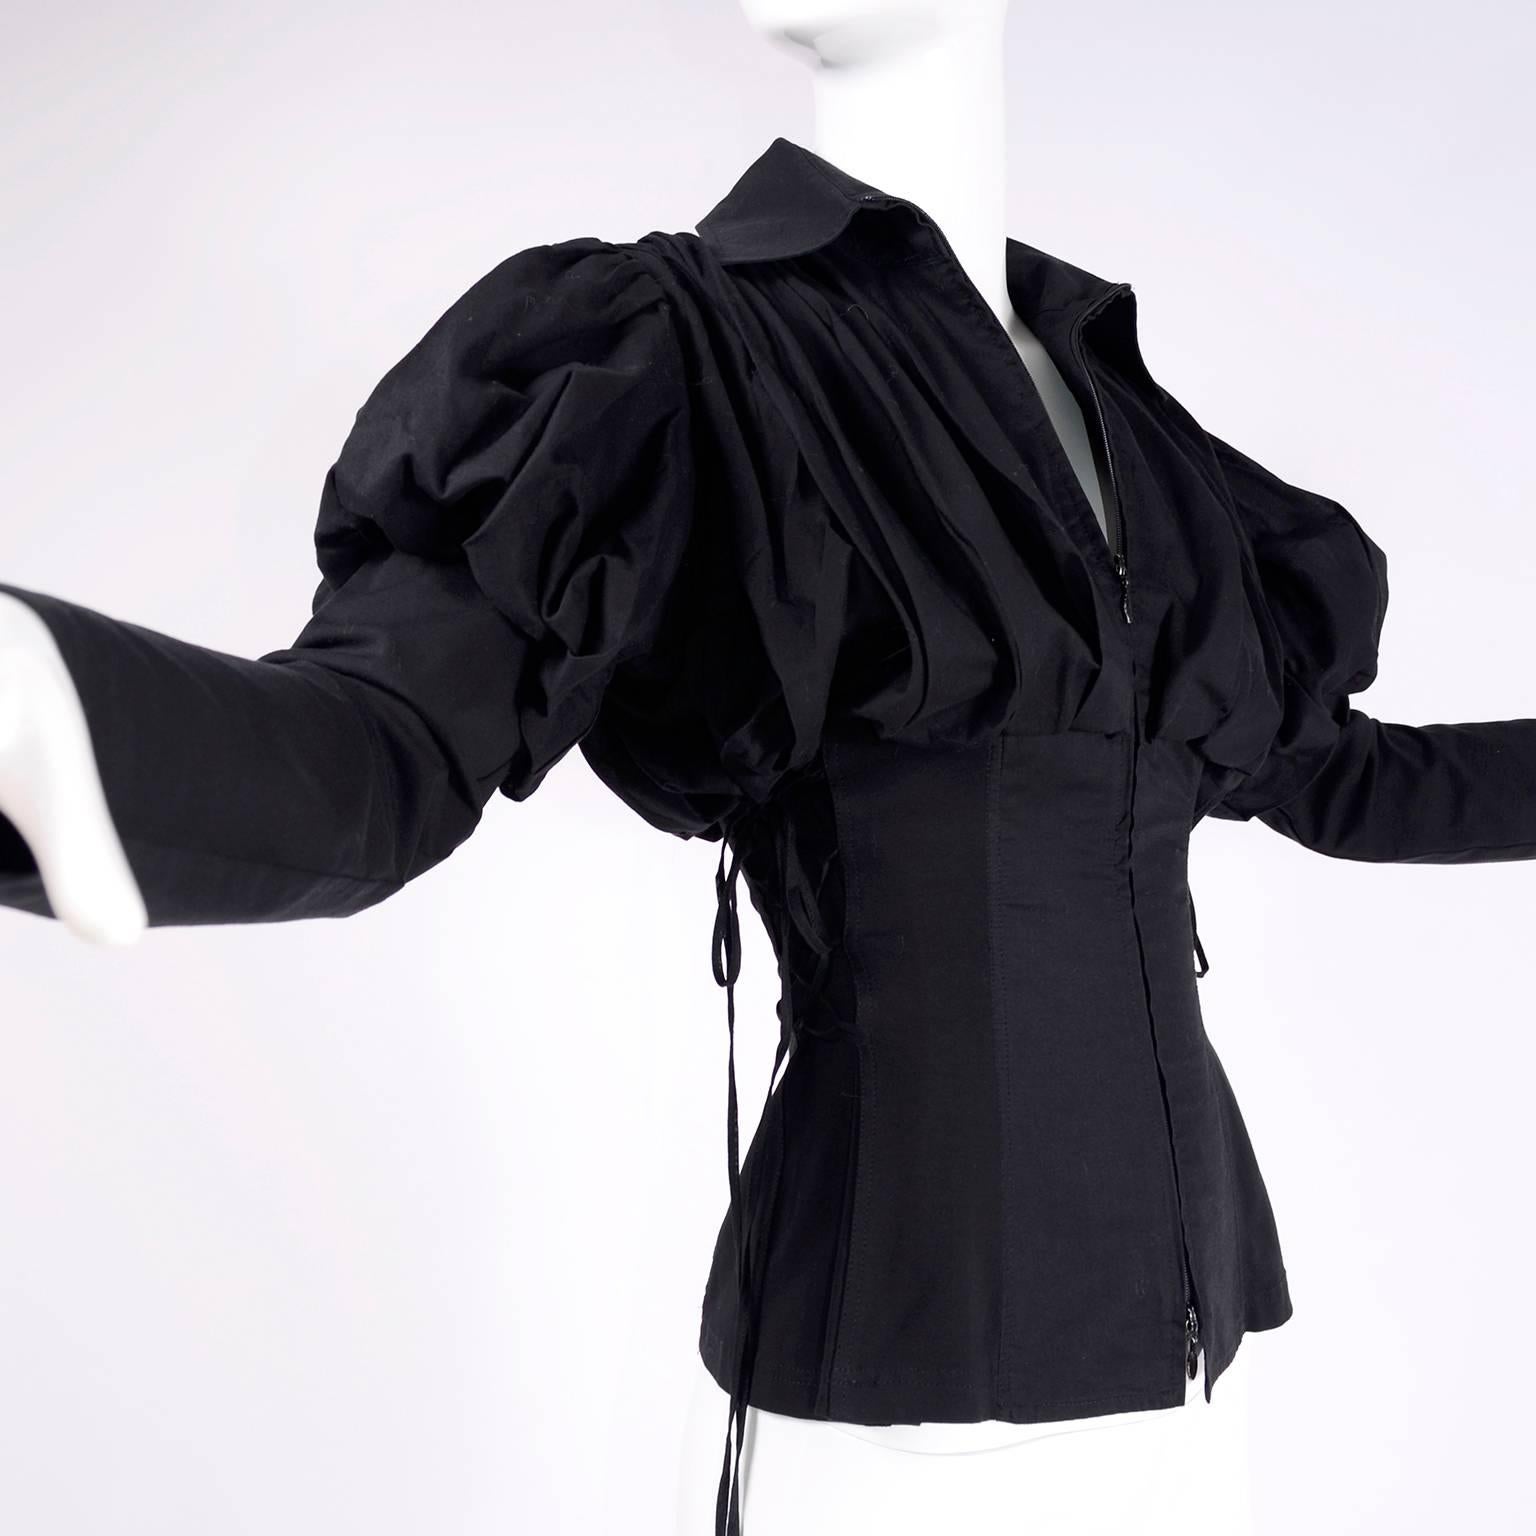 This rare style  Anne Fontaine Blouse is in a rich black pima cotton with gorgeous leg of mutton sleeves and dramatic laces on the sides. The blouse is styled like a Victorian corset with stays and a fitted waist and it has hooks and eyes for